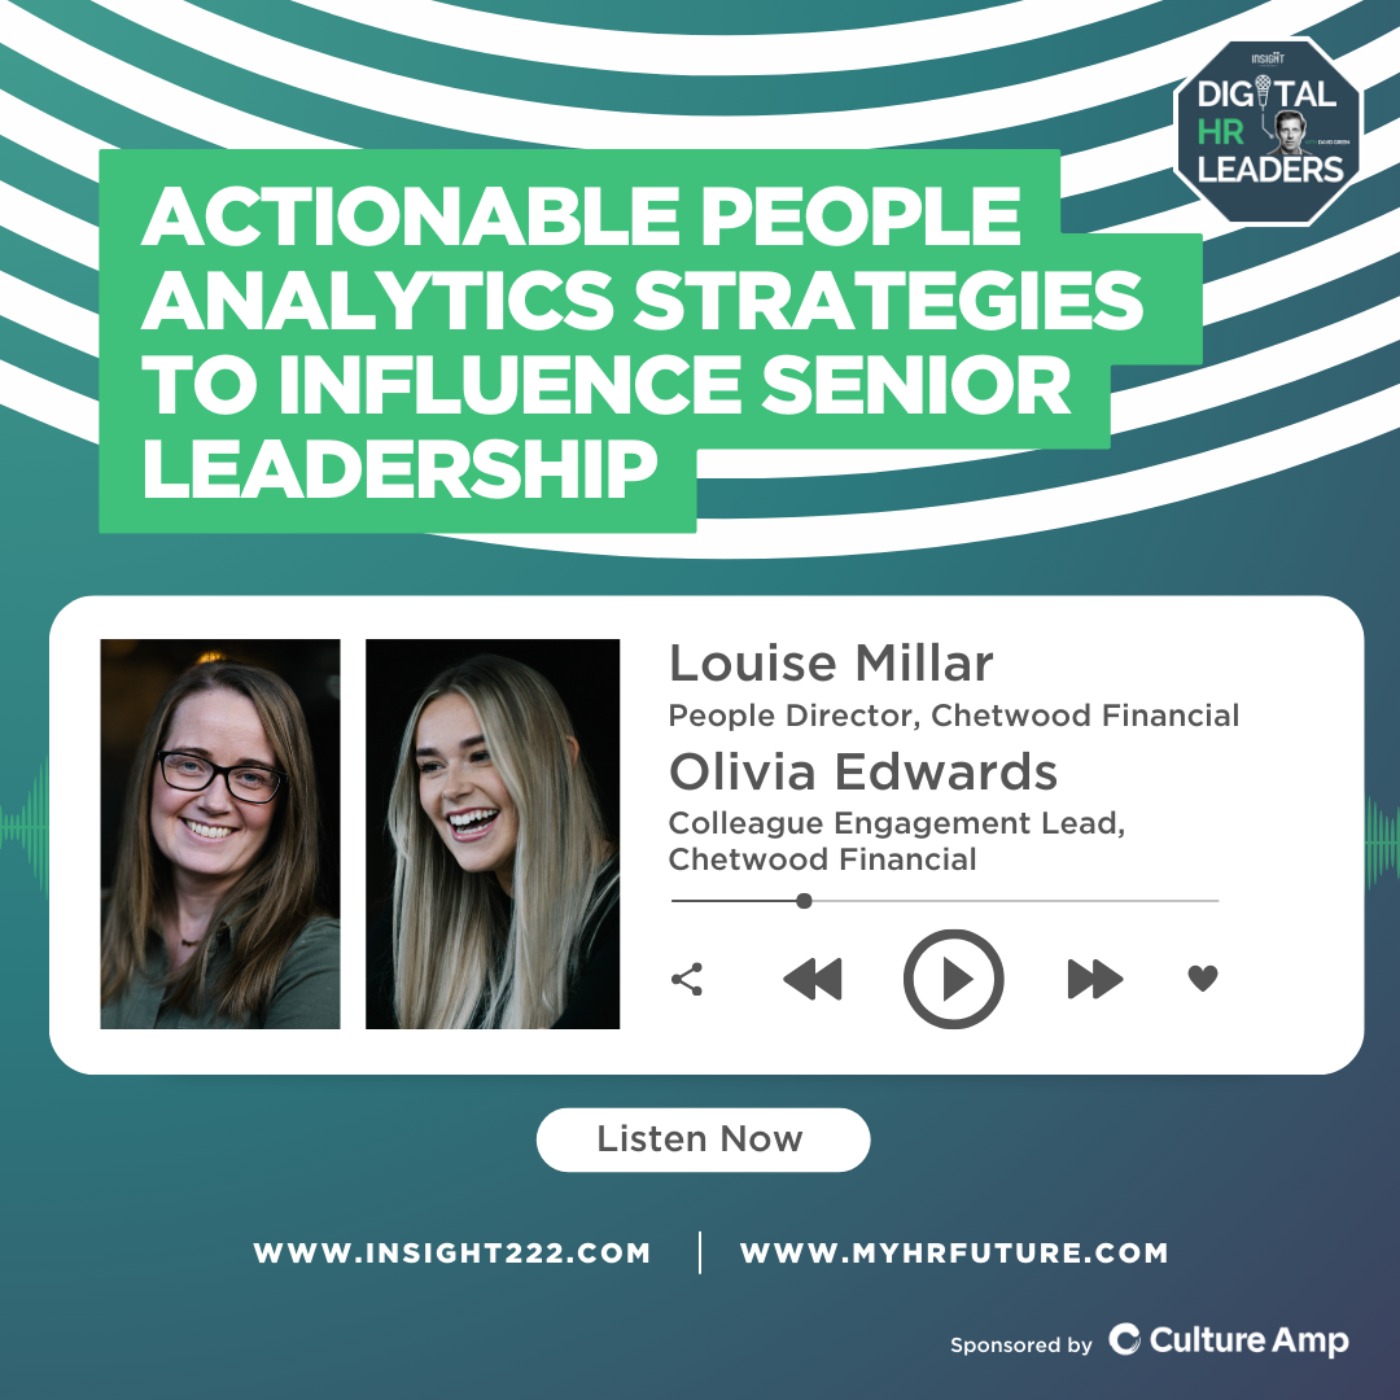 Actionable People Analytics Strategies to Influence Senior Leadership (an Interview with Louise Millar and Olivia Edwards)